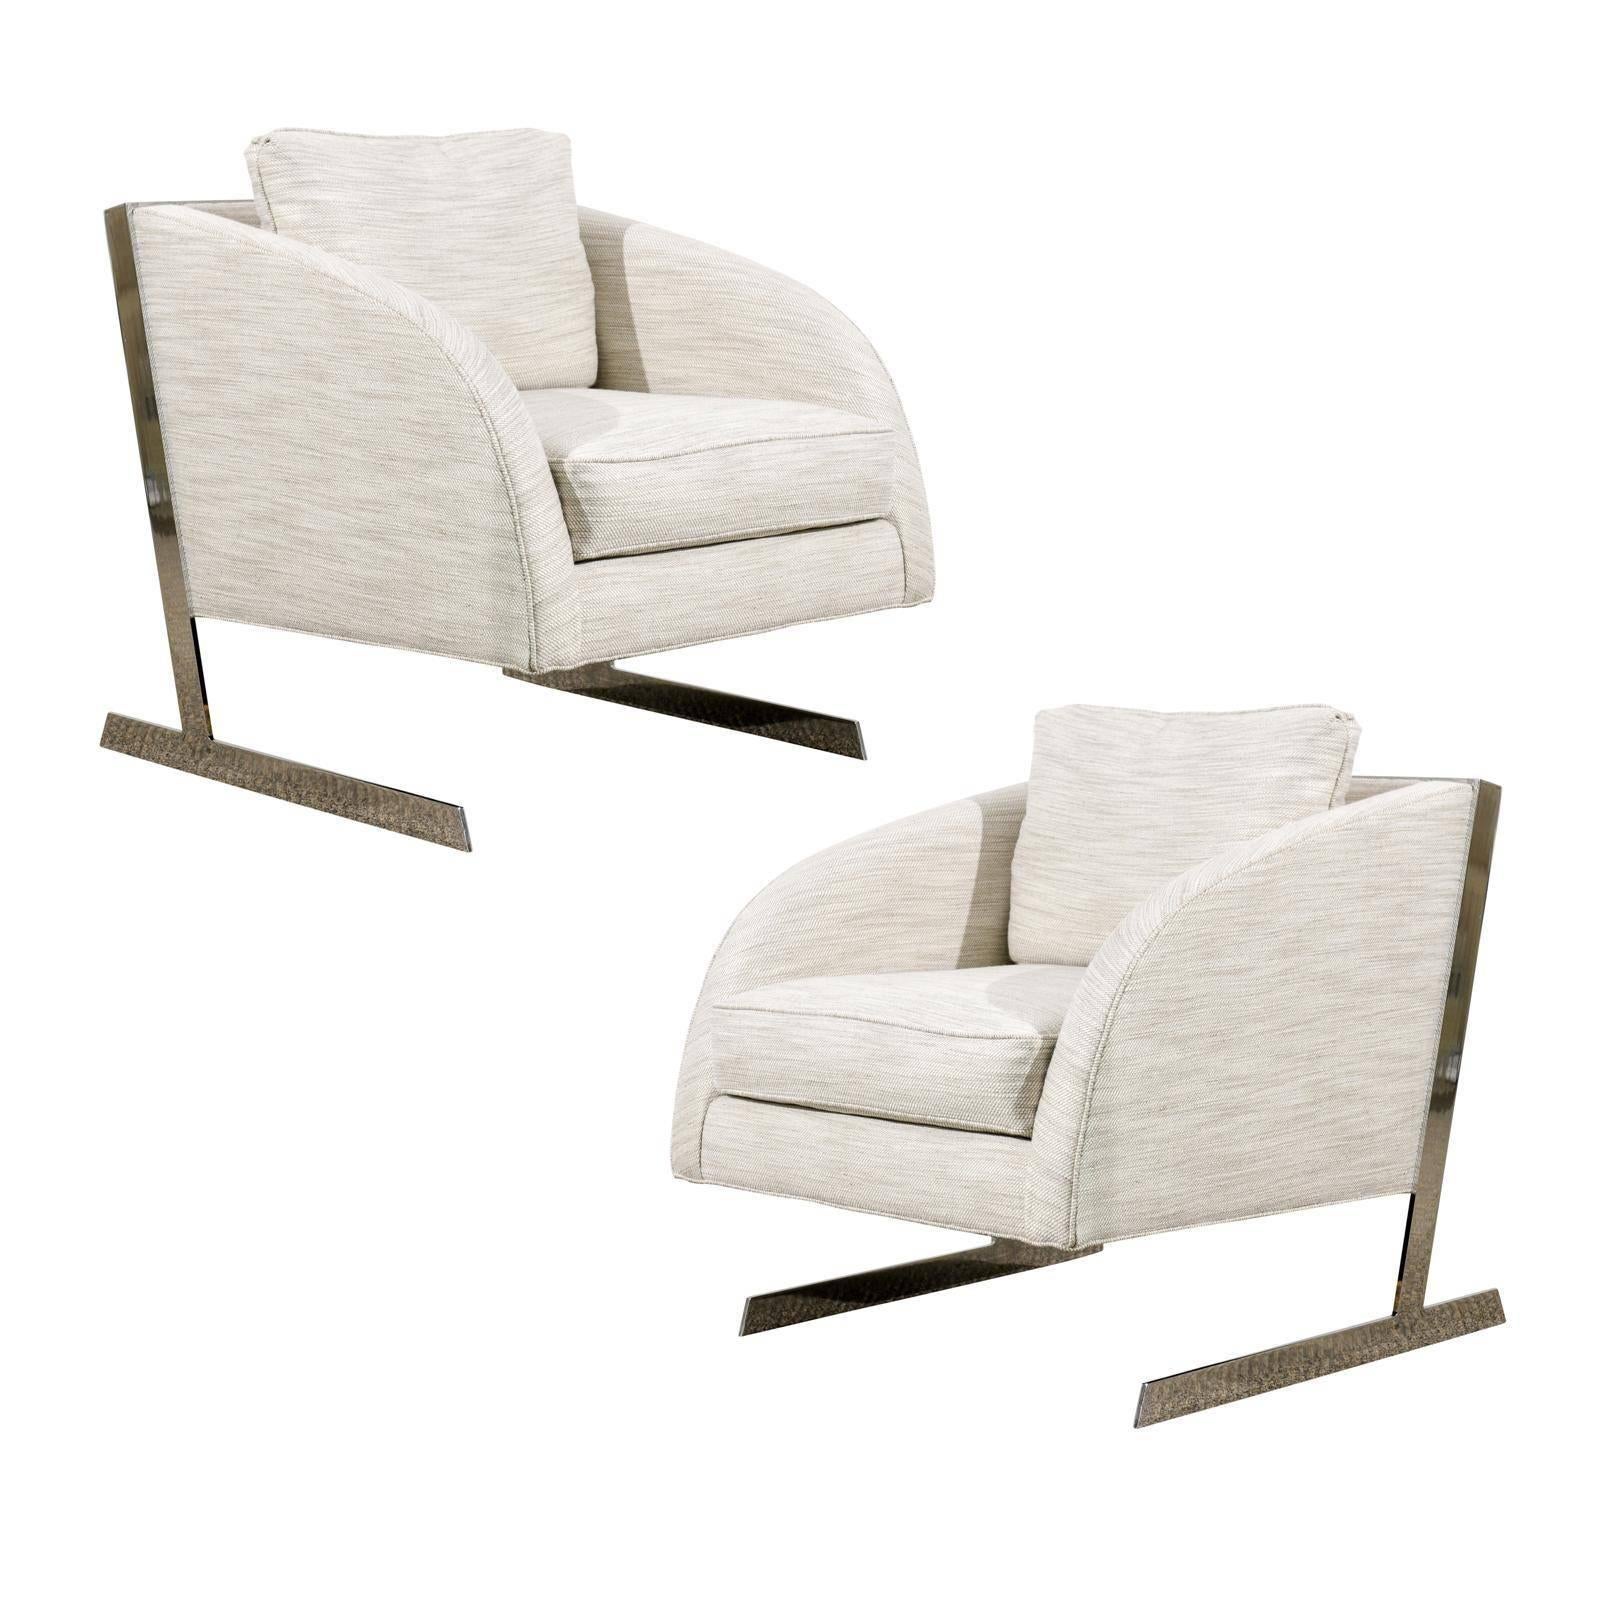 Pair of Mid-Centruy Modern chairs by Milo Baughman